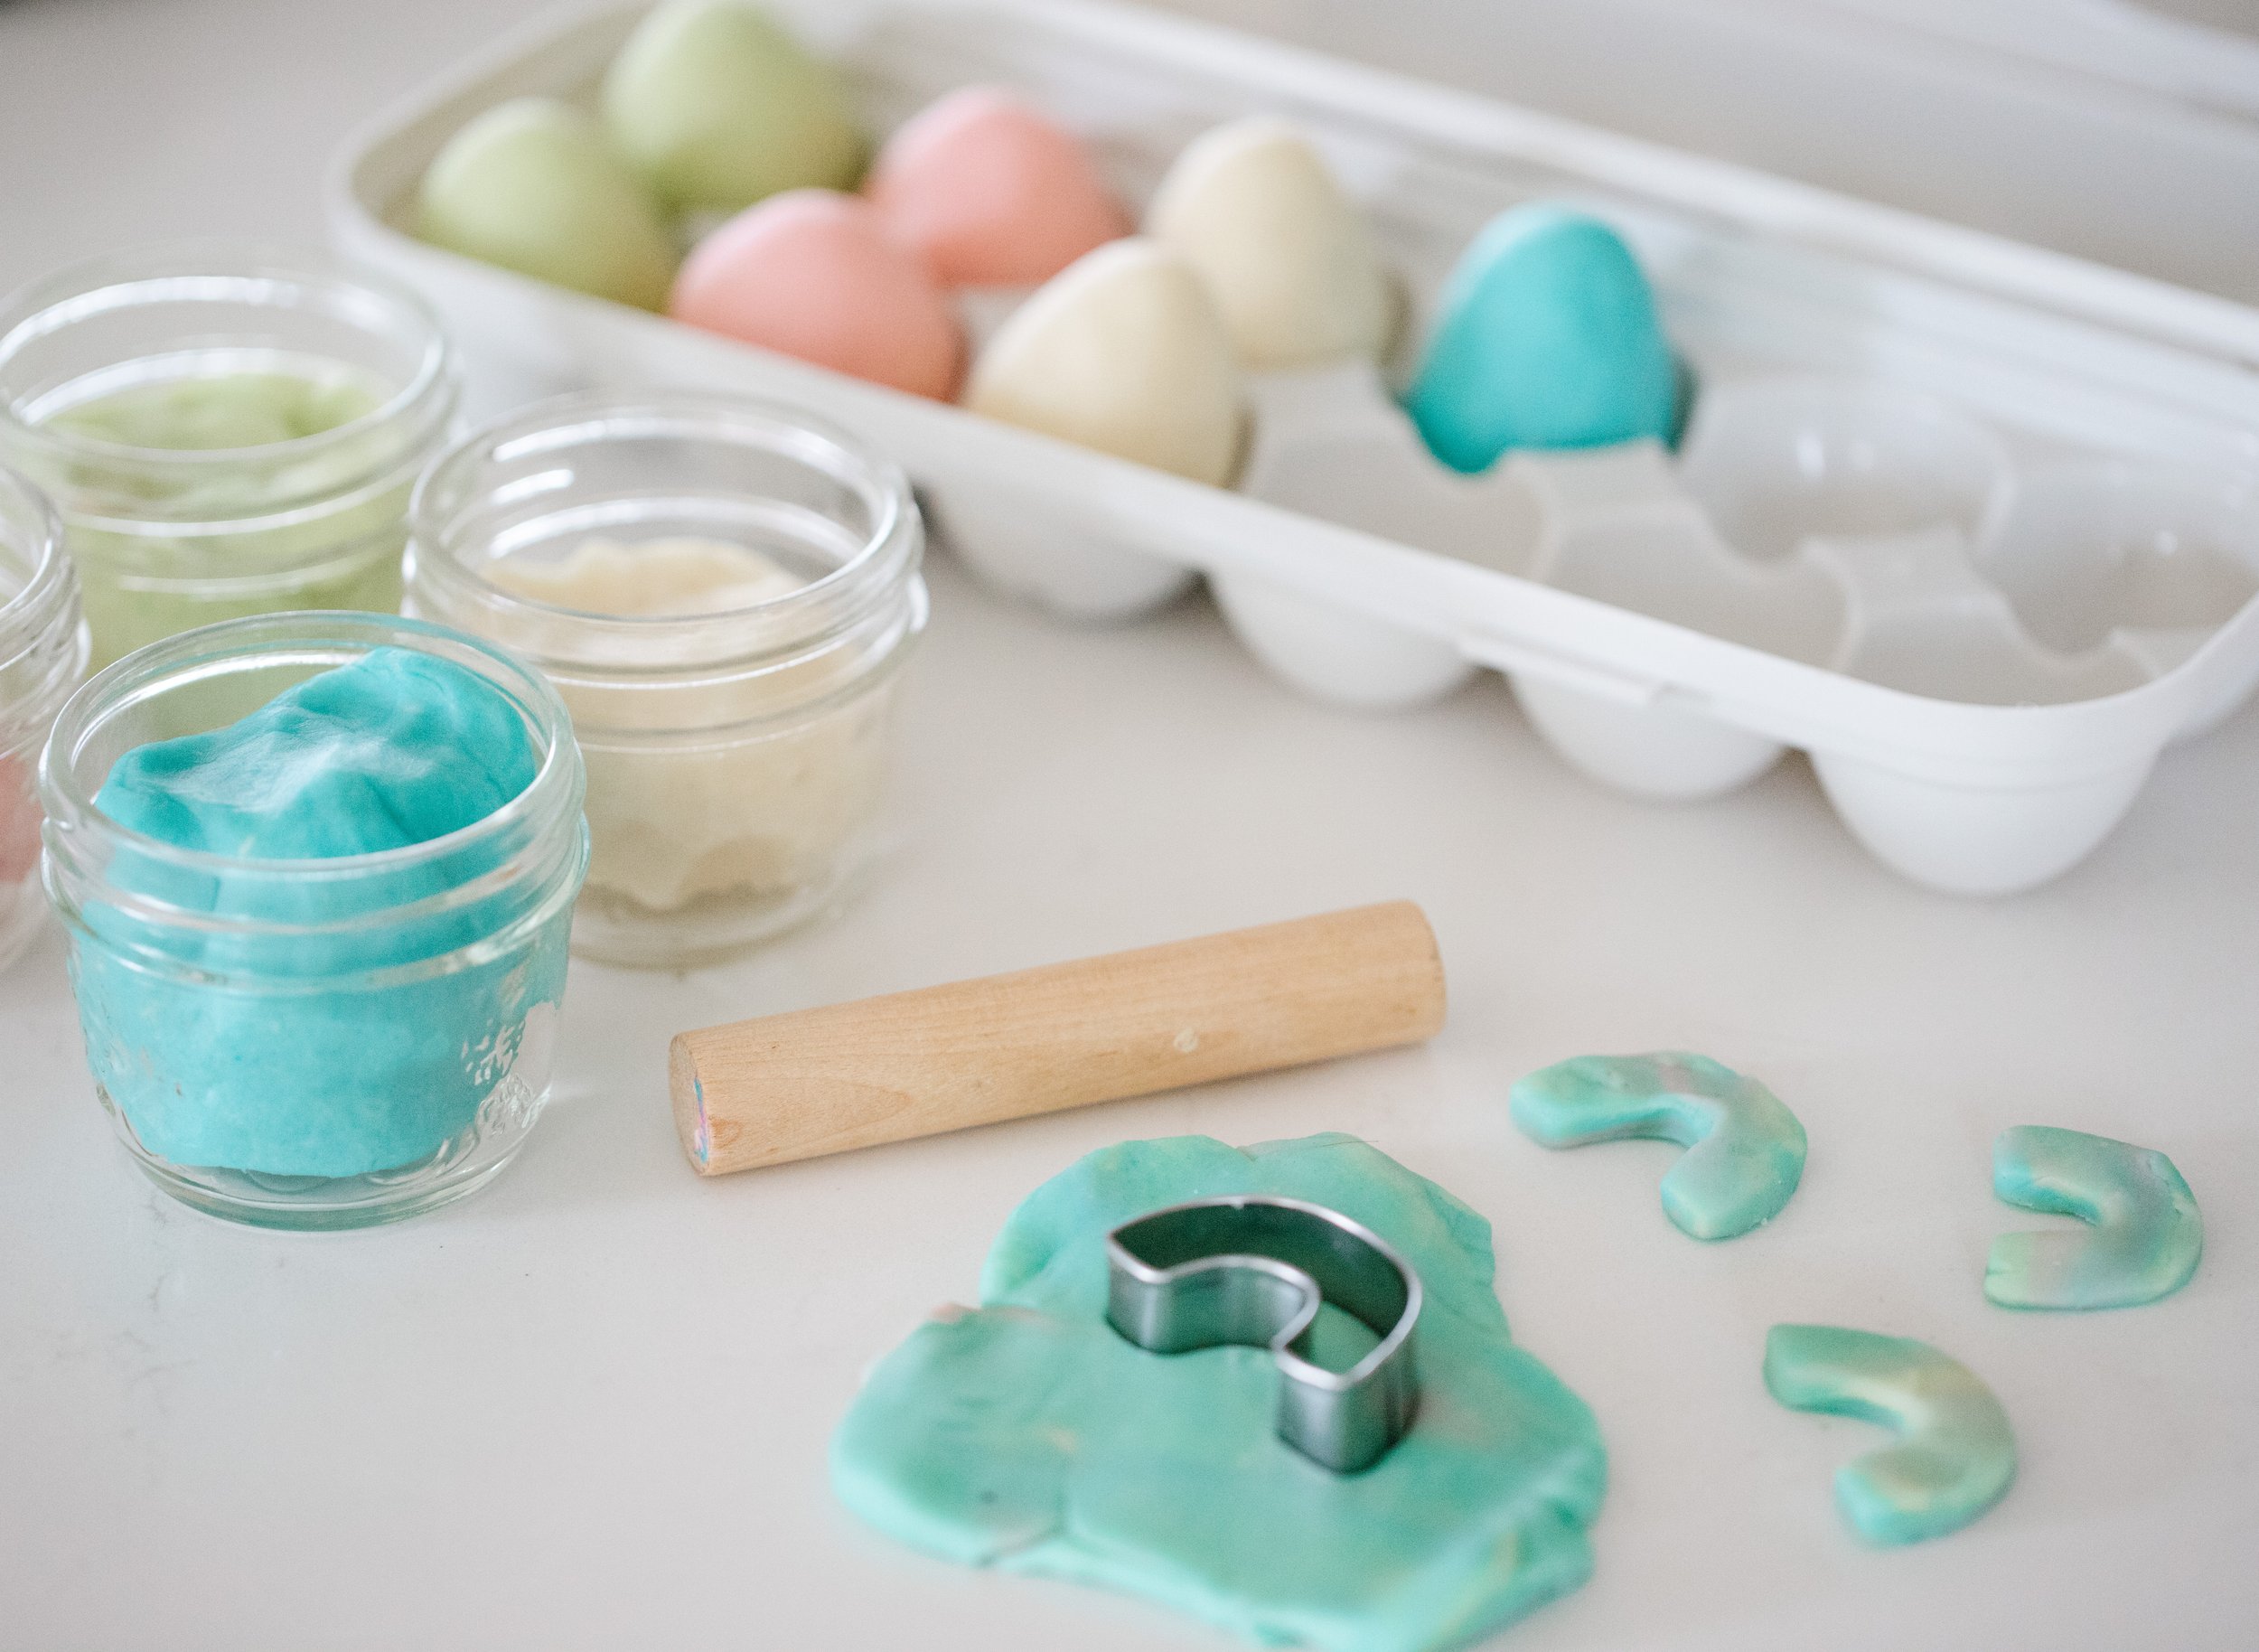 Homemade Non-toxic Playdough infused With Essential Oils 